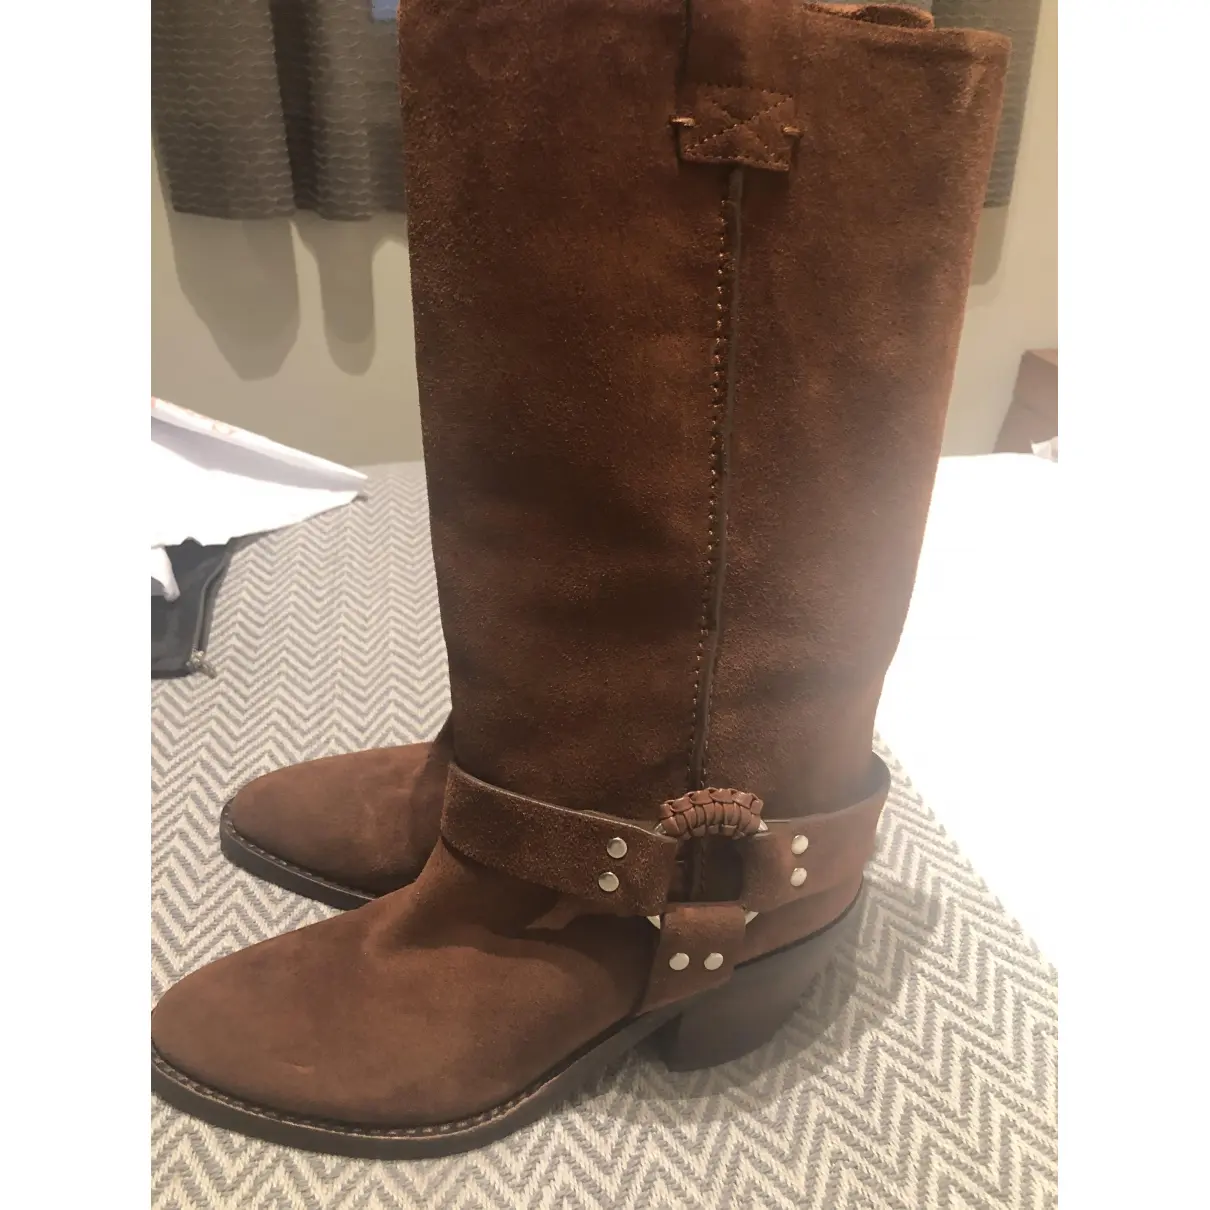 Buy See by Chloé Western boots online